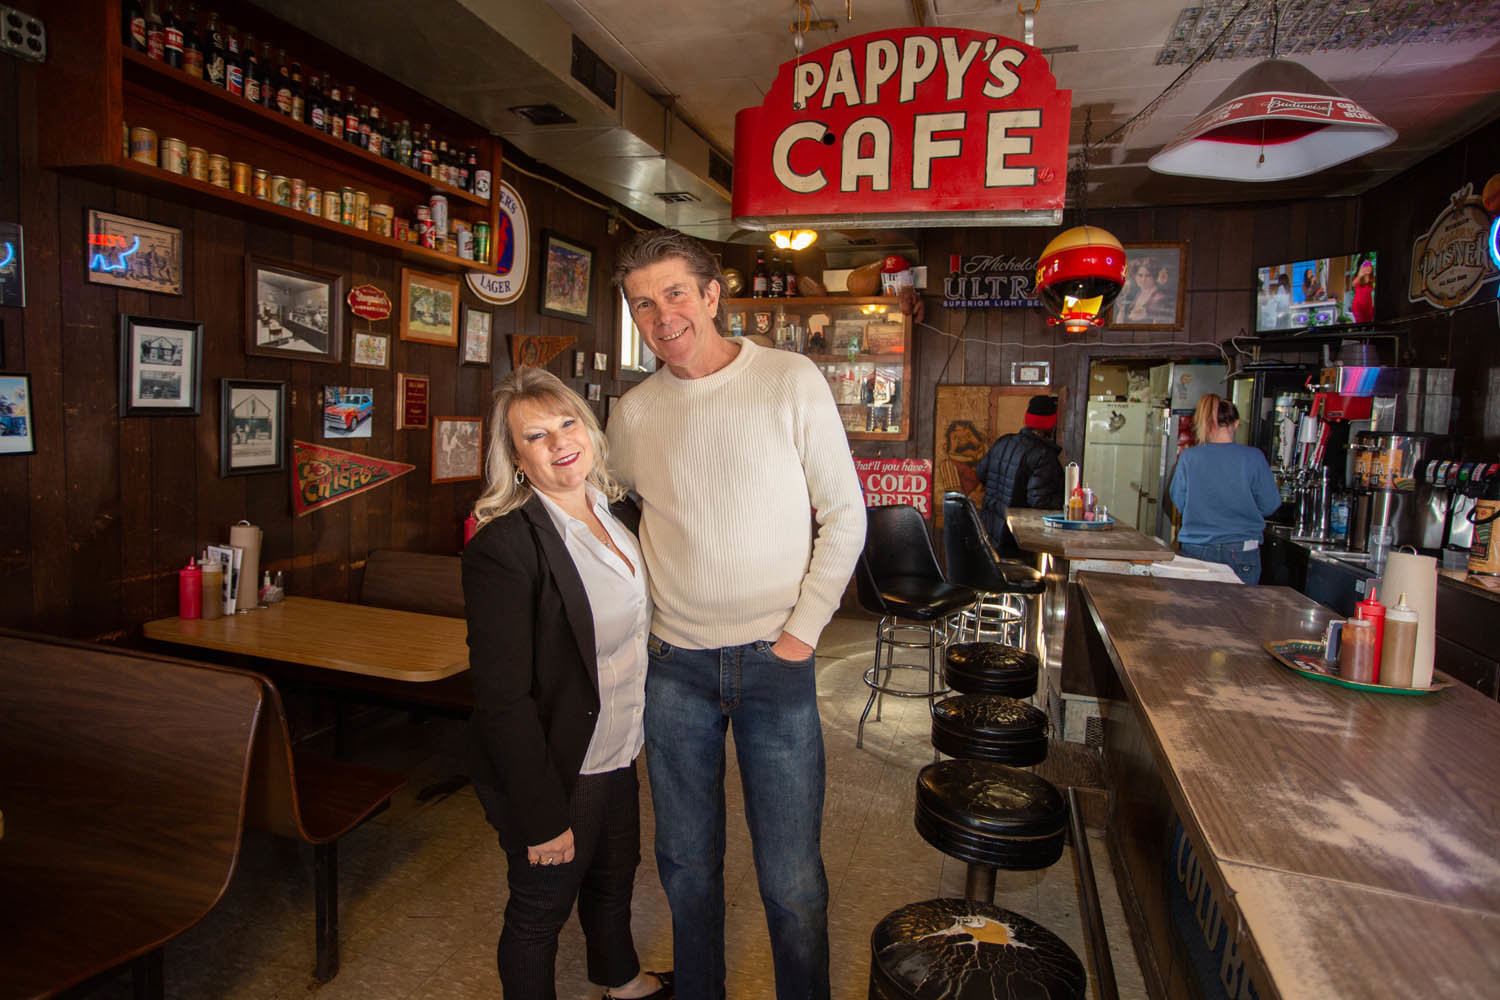 Wayne Rader purchased Pappy's Place in 2020 with his wife, Susan.